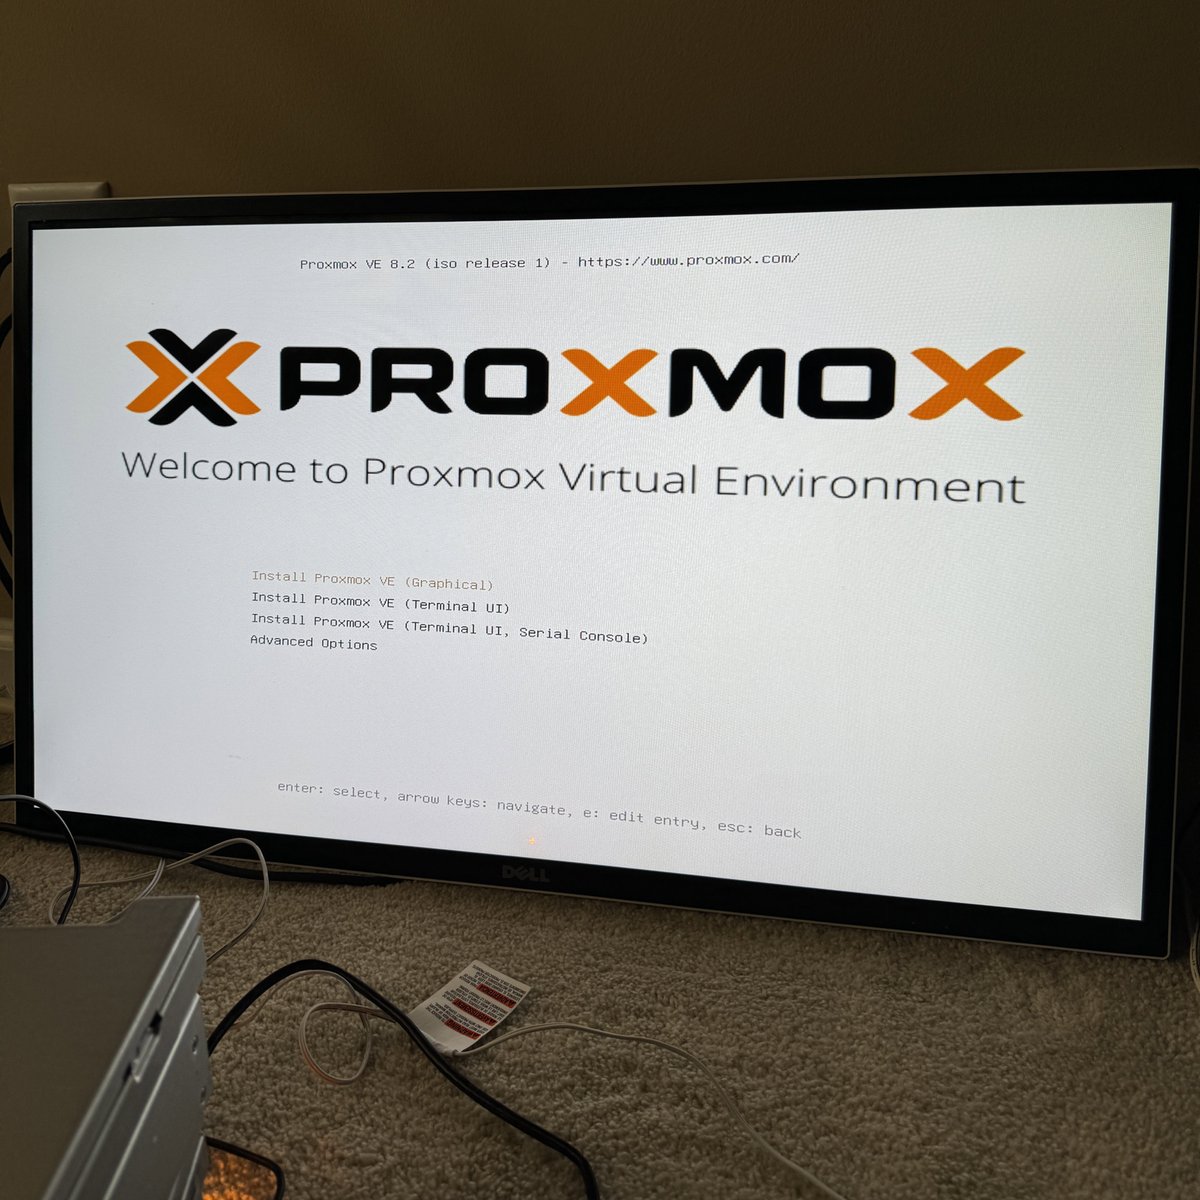 I have used VMware in my homelab for over a decade - in a few months time I’ll be losing all of my employee licenses, so I figure it’s a good time to move on.

I’ve never used Proxmox before so it should be fun to learn.